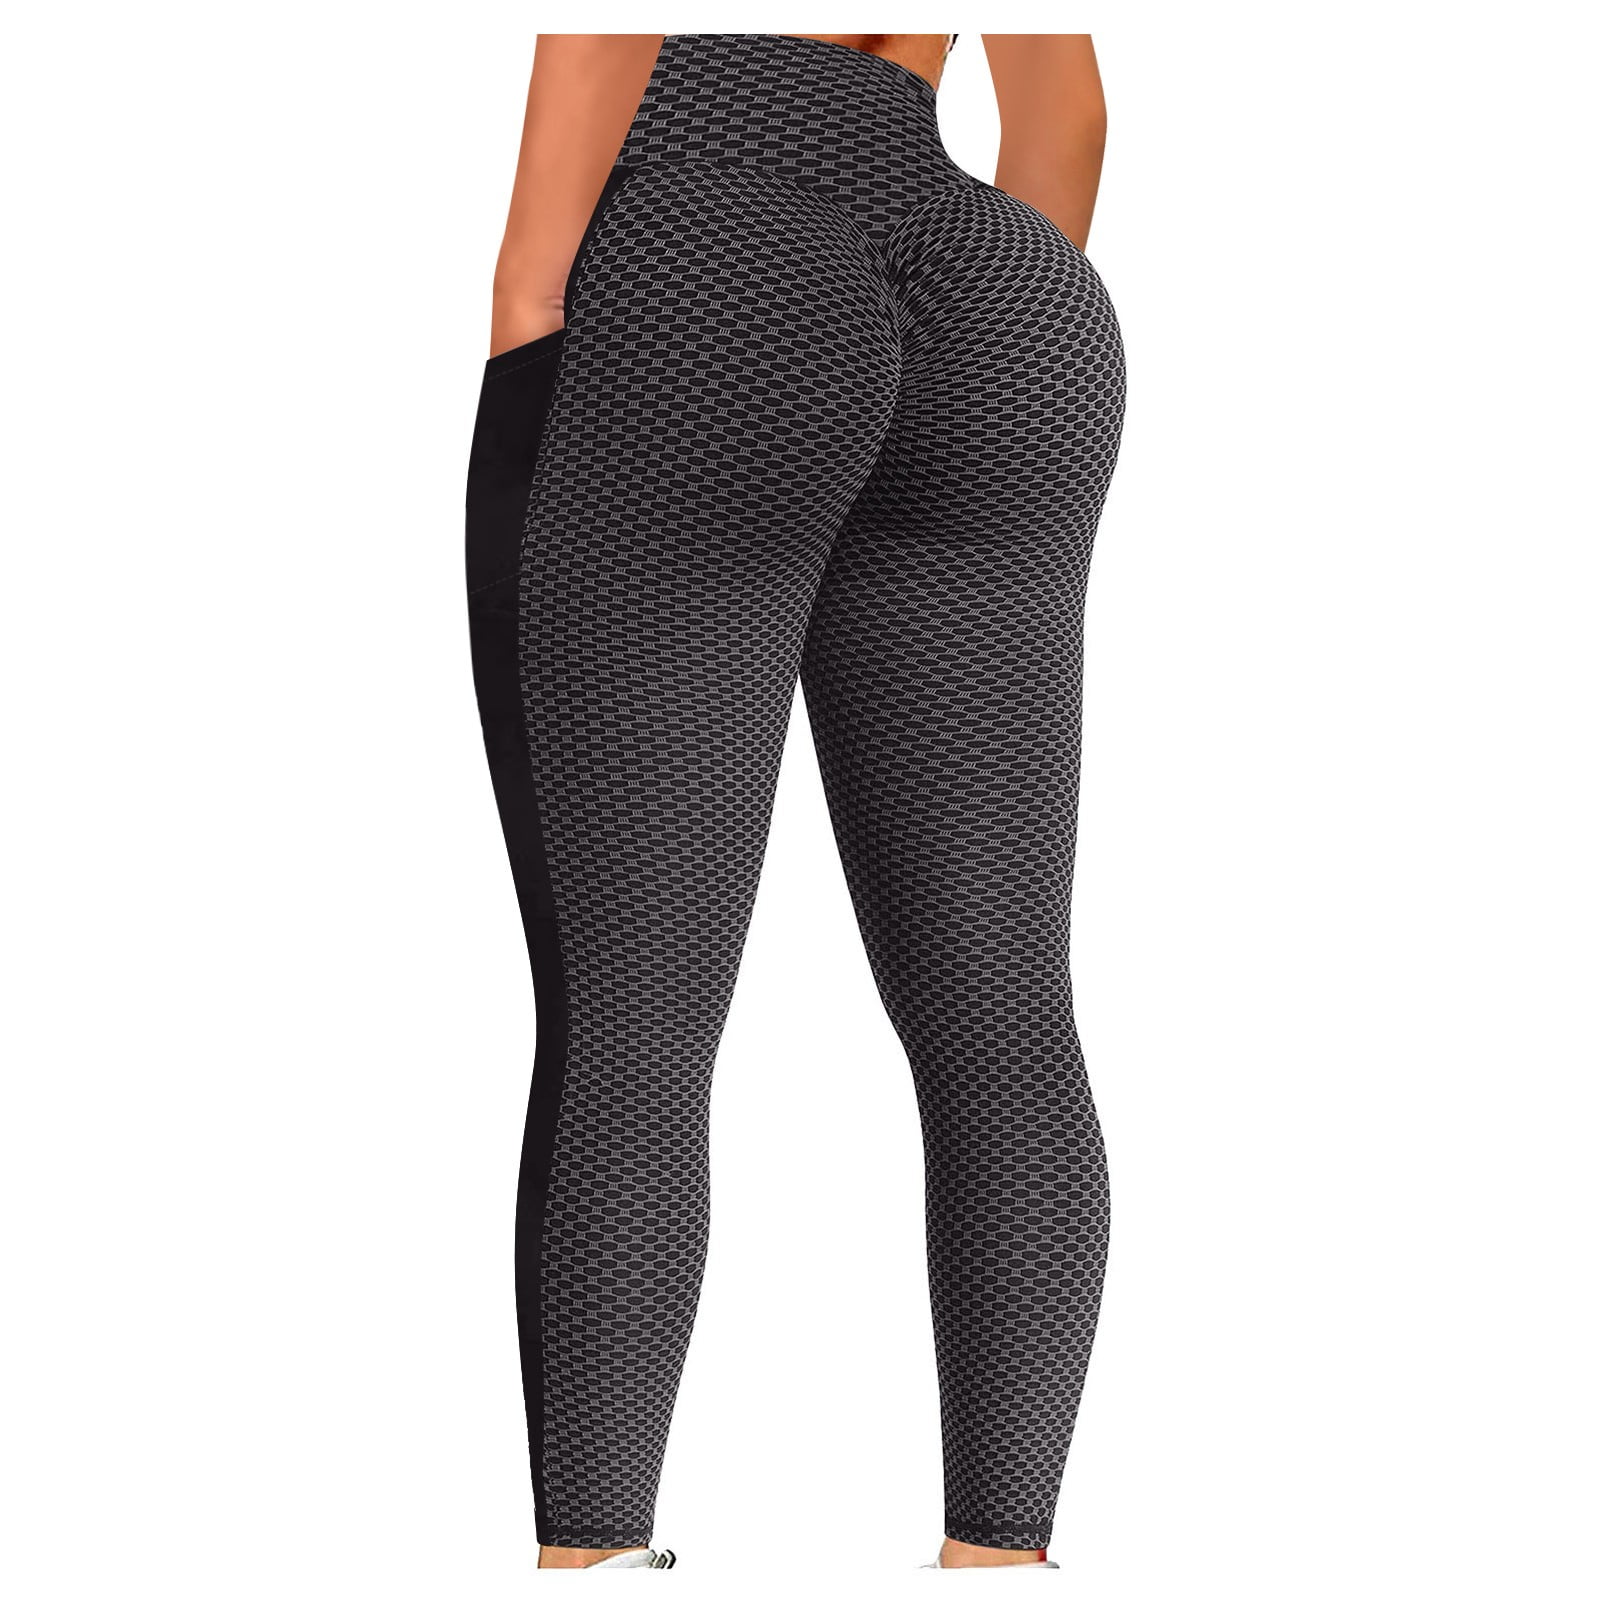 D’Chica Printed Sports Leggings with Side Pockets & Ruffles for Women, High  Waist Yoga Tight for Womens & Girls, Activewear Pants, Running Tights for